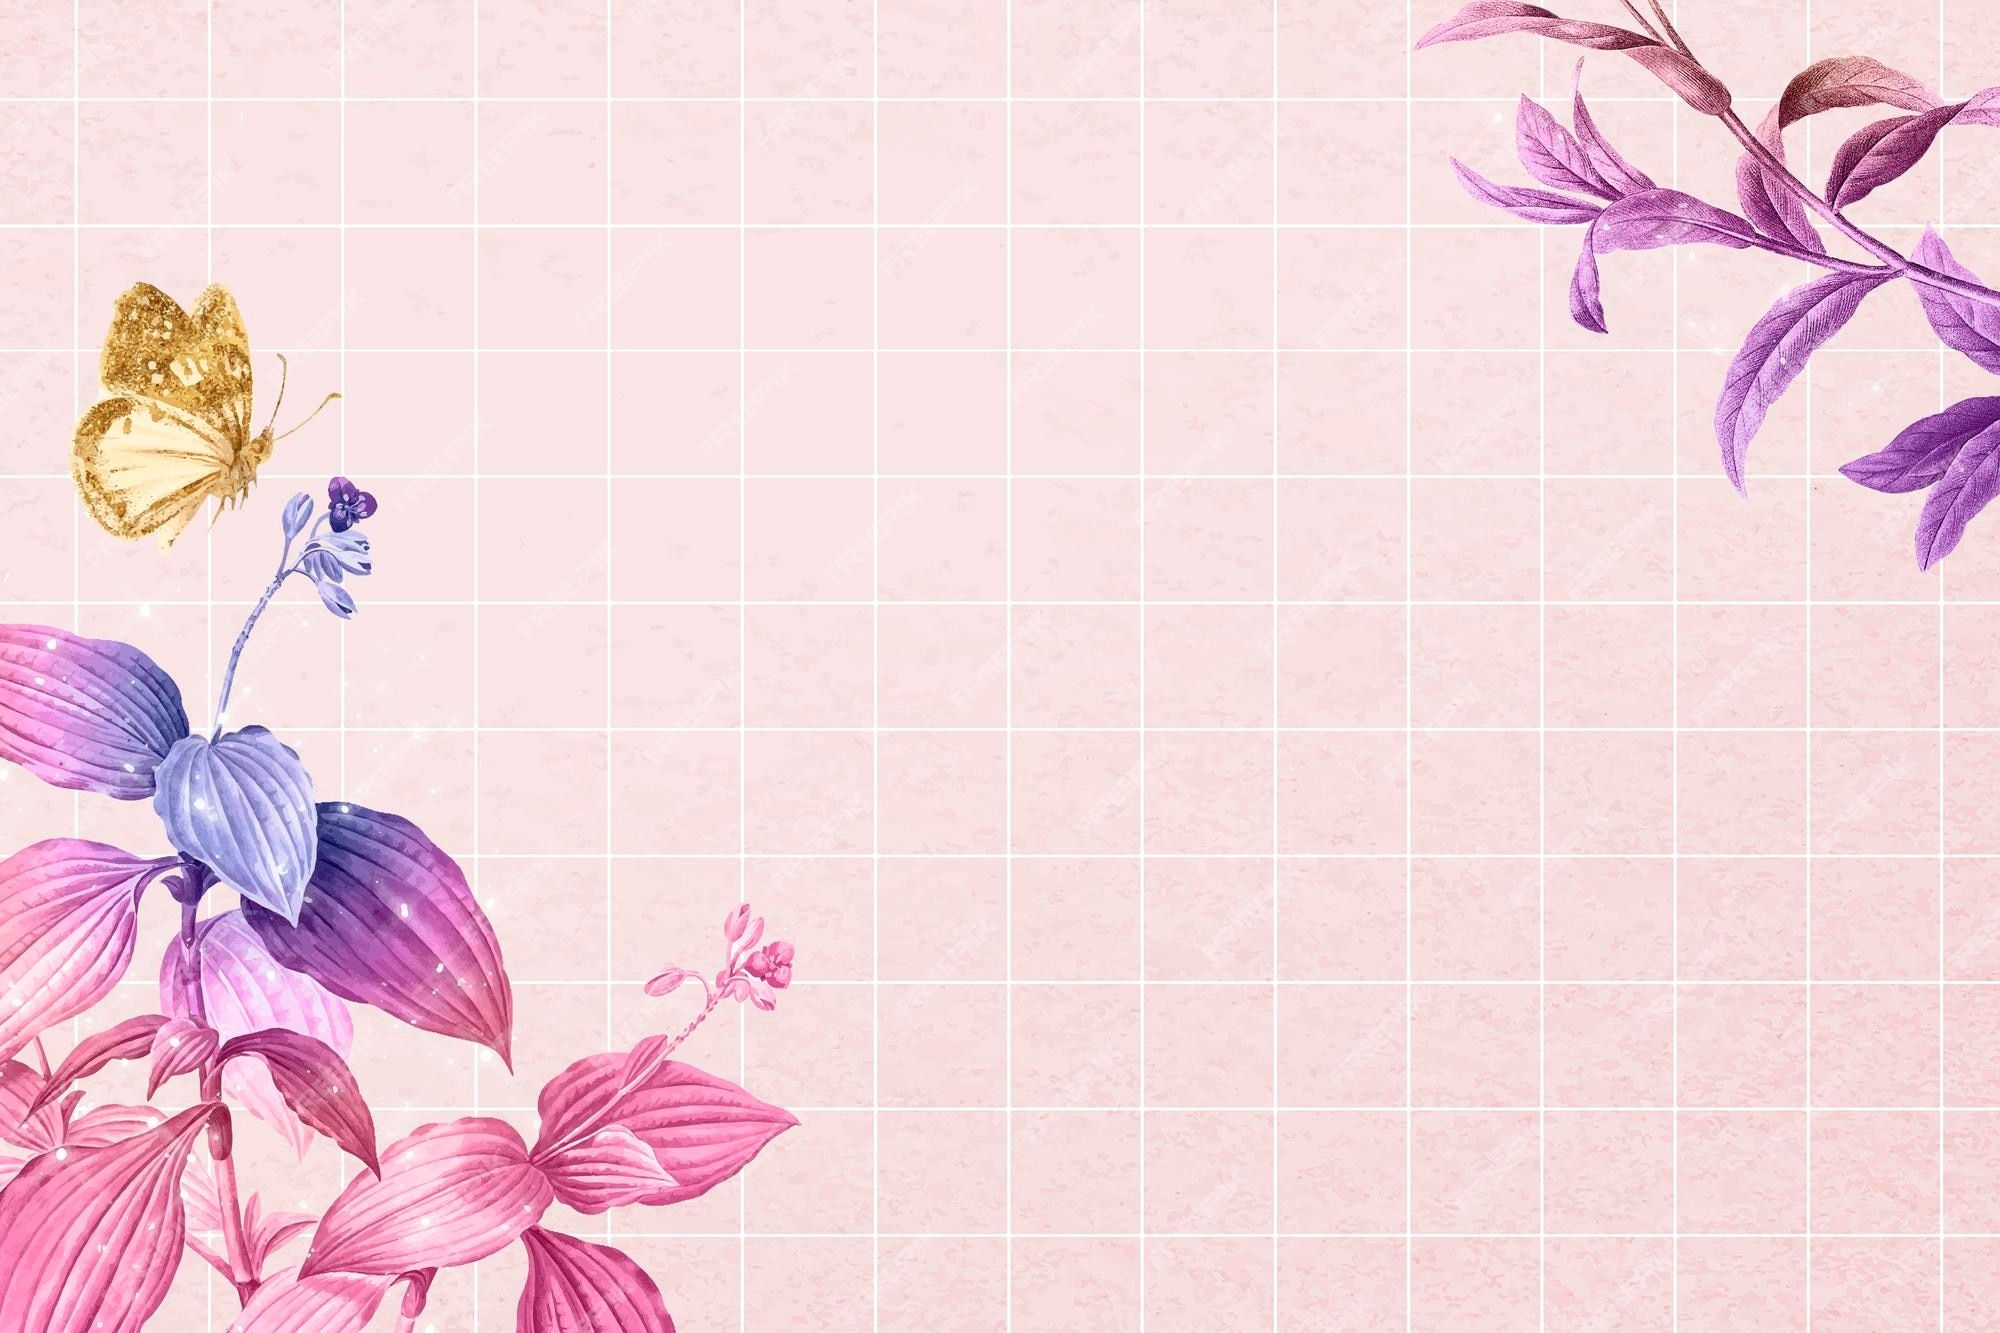 Free Vector. Flower background aesthetic border vector, remixed from vintage public domain image